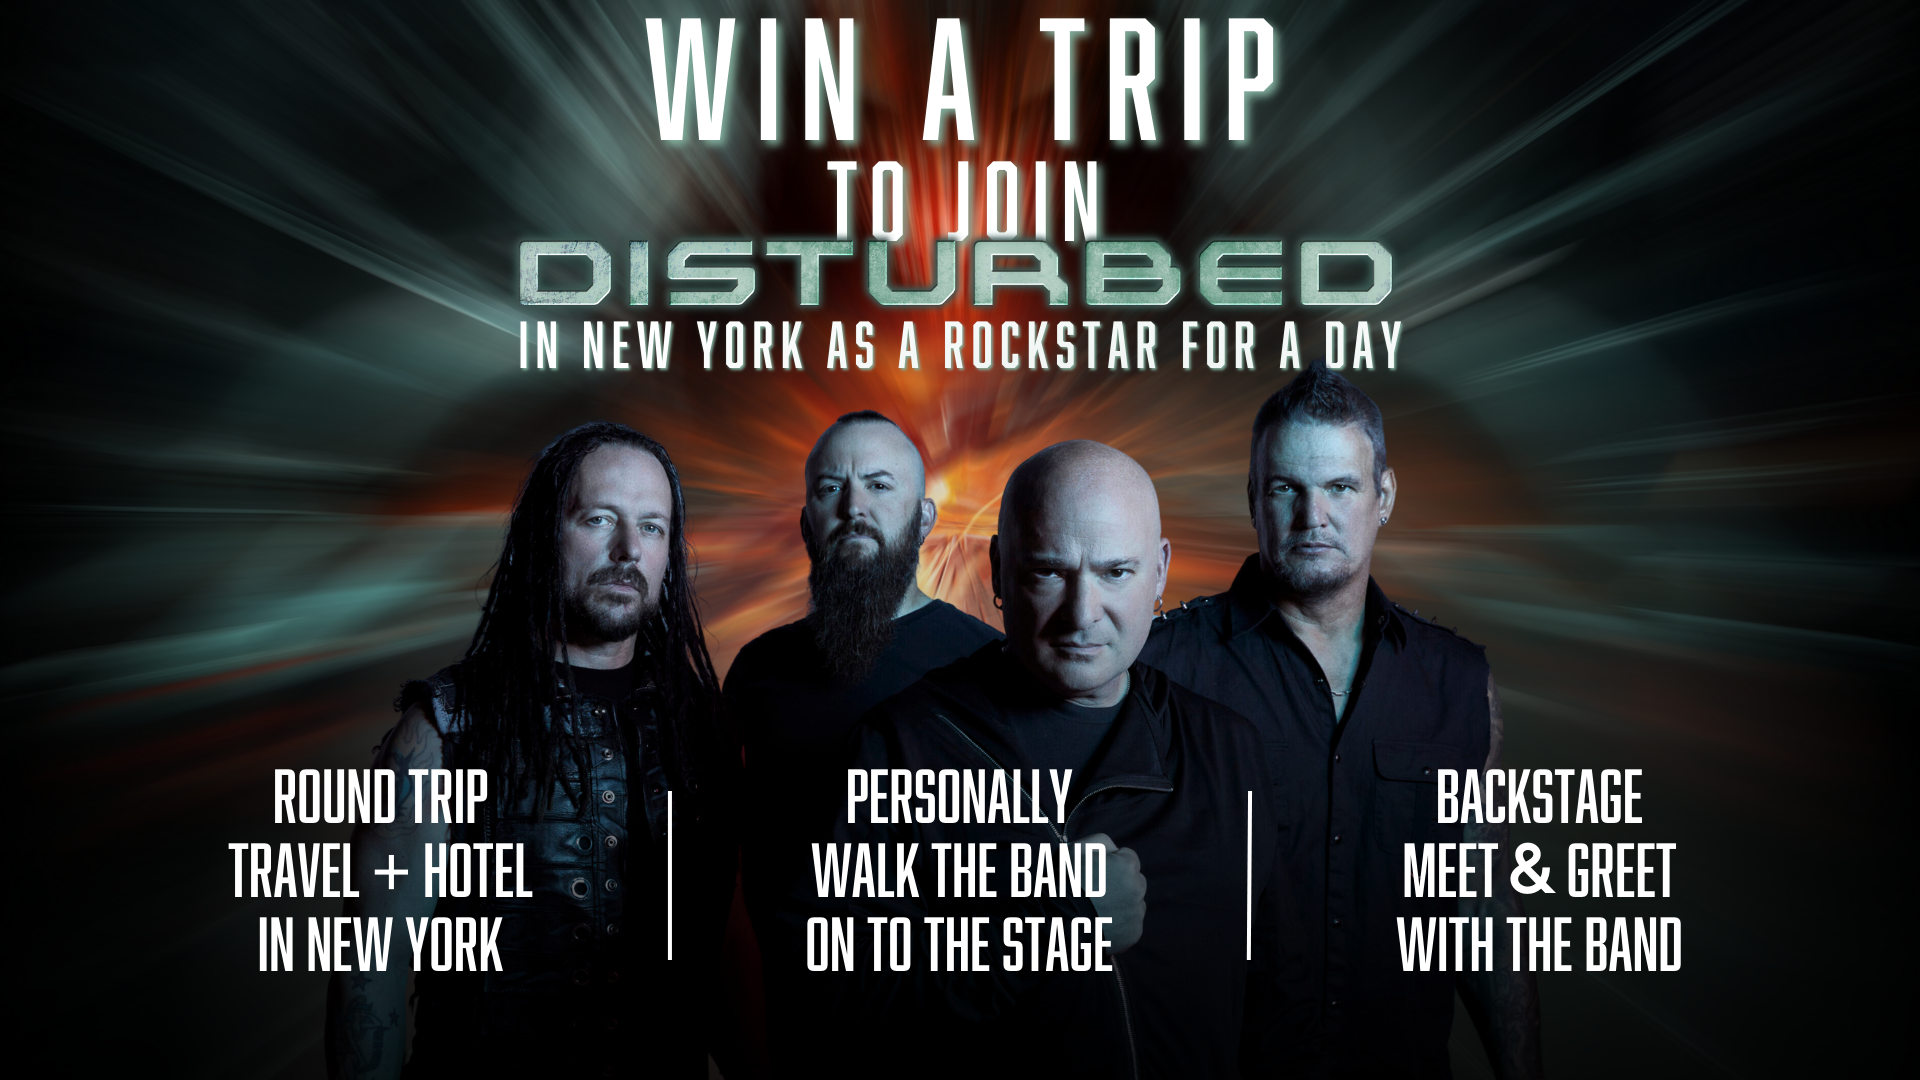 Donate to win a trip to see Disturbed in New York with travel, stay, and VIP treatment included 